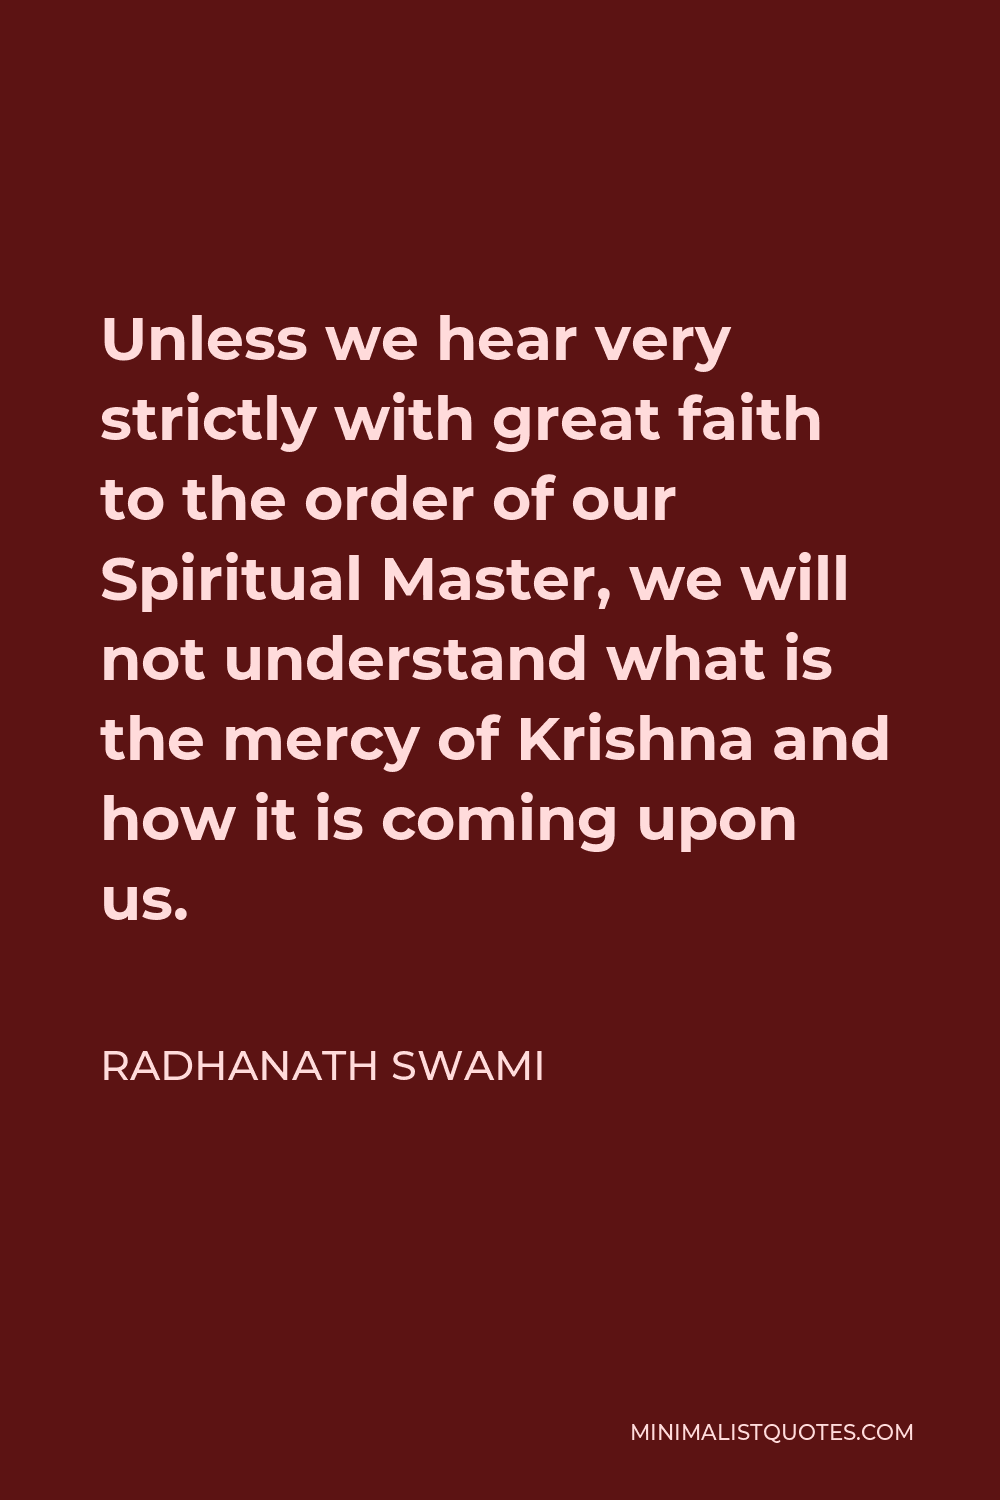 Radhanath Swami Quote - Unless we hear very strictly with great faith to the order of our Spiritual Master, we will not understand what is the mercy of Krishna and how it is coming upon us.